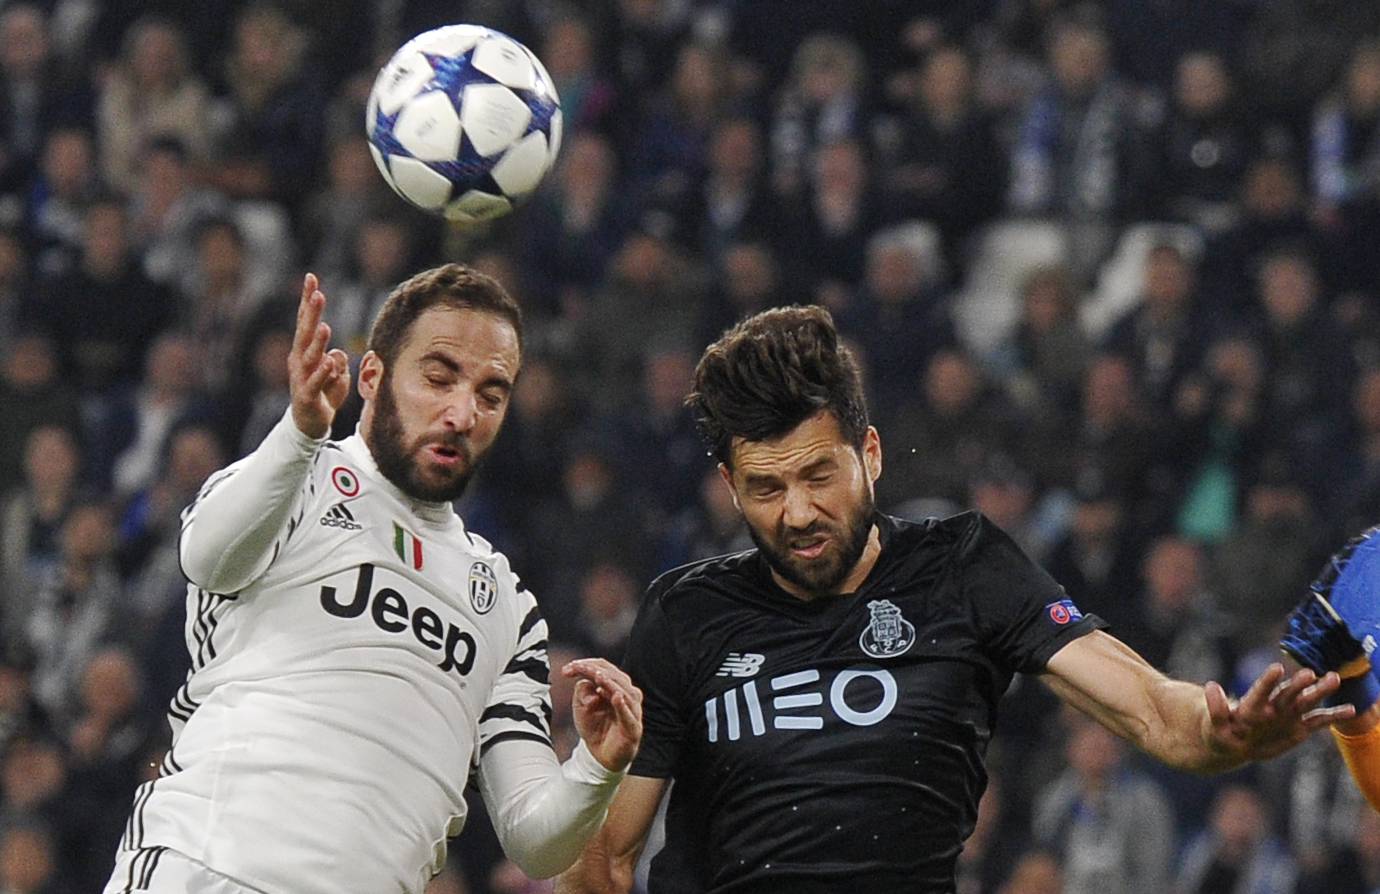 FC Porto's Miguel Layun in action with Juventus' Gonzalo Higuain